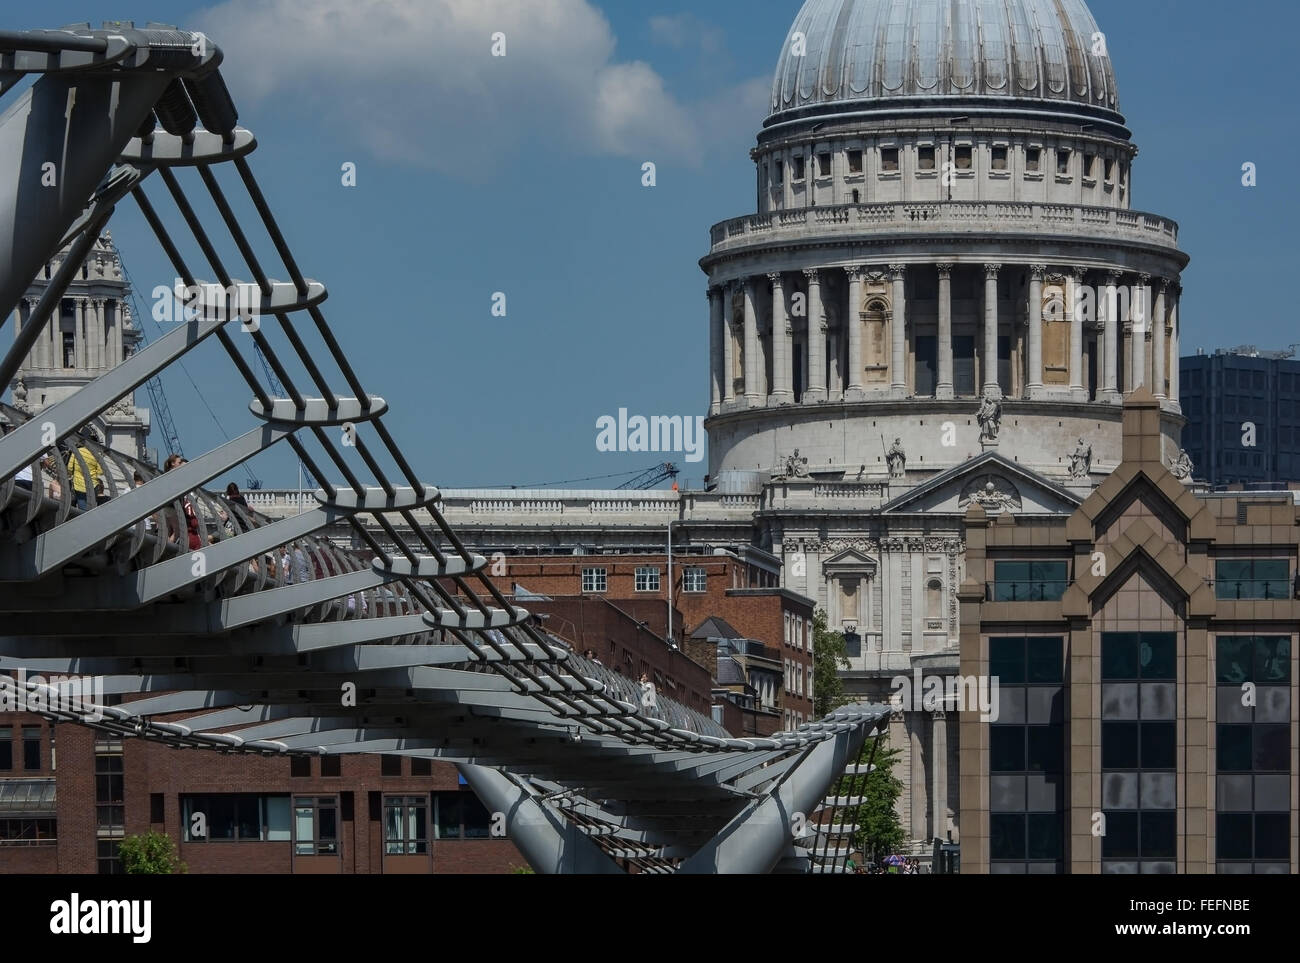 View of St Paul's Cathedral, London featuring the Millenium Bridge Stock Photo